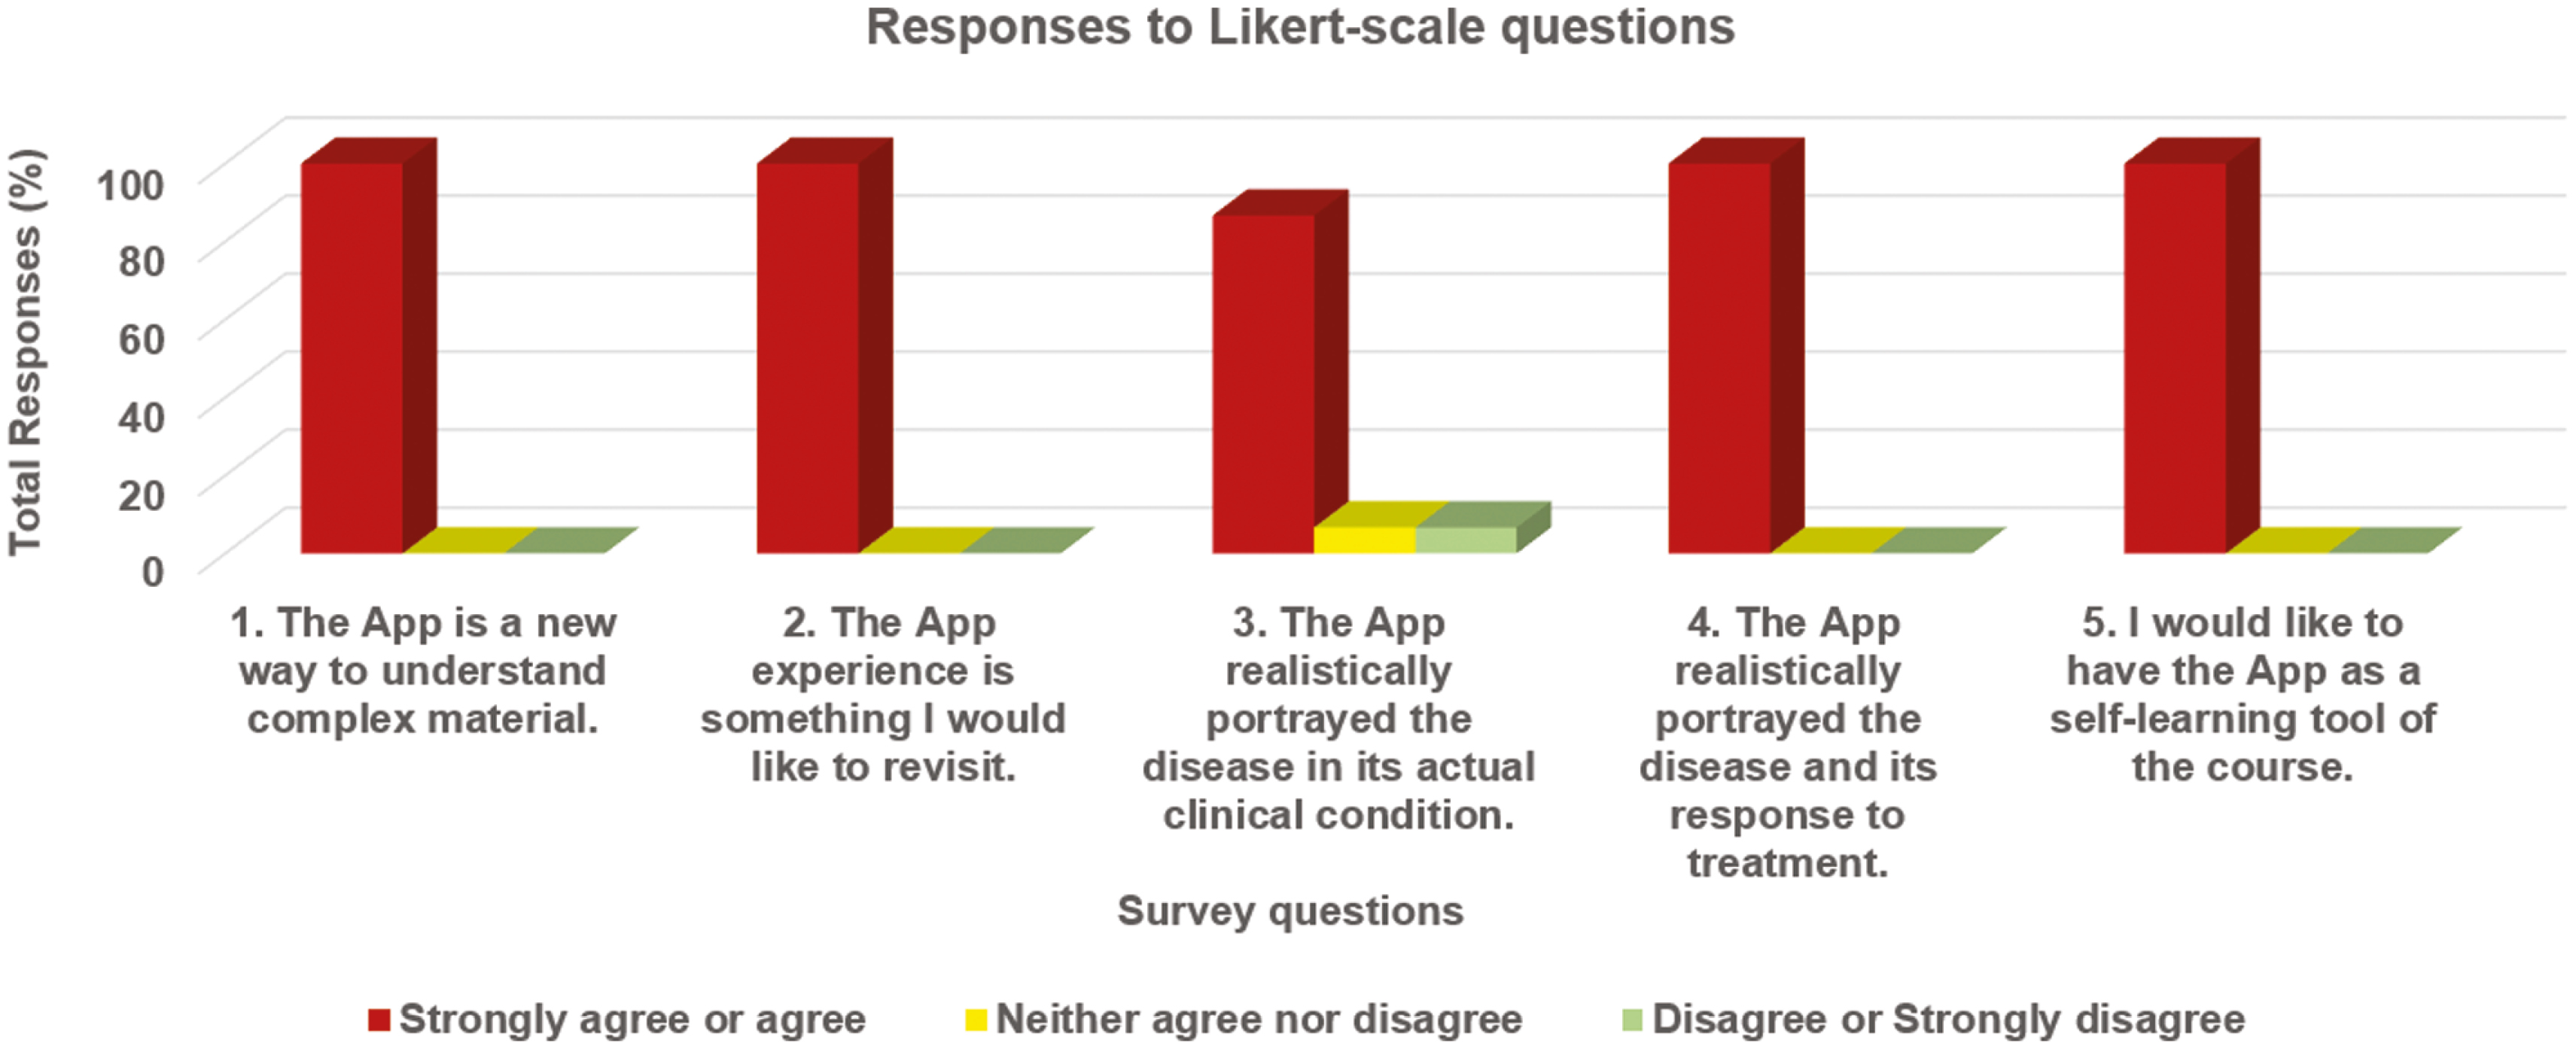 Pharmacy students’ responses (15%) to the beta version of the AR App in 2020